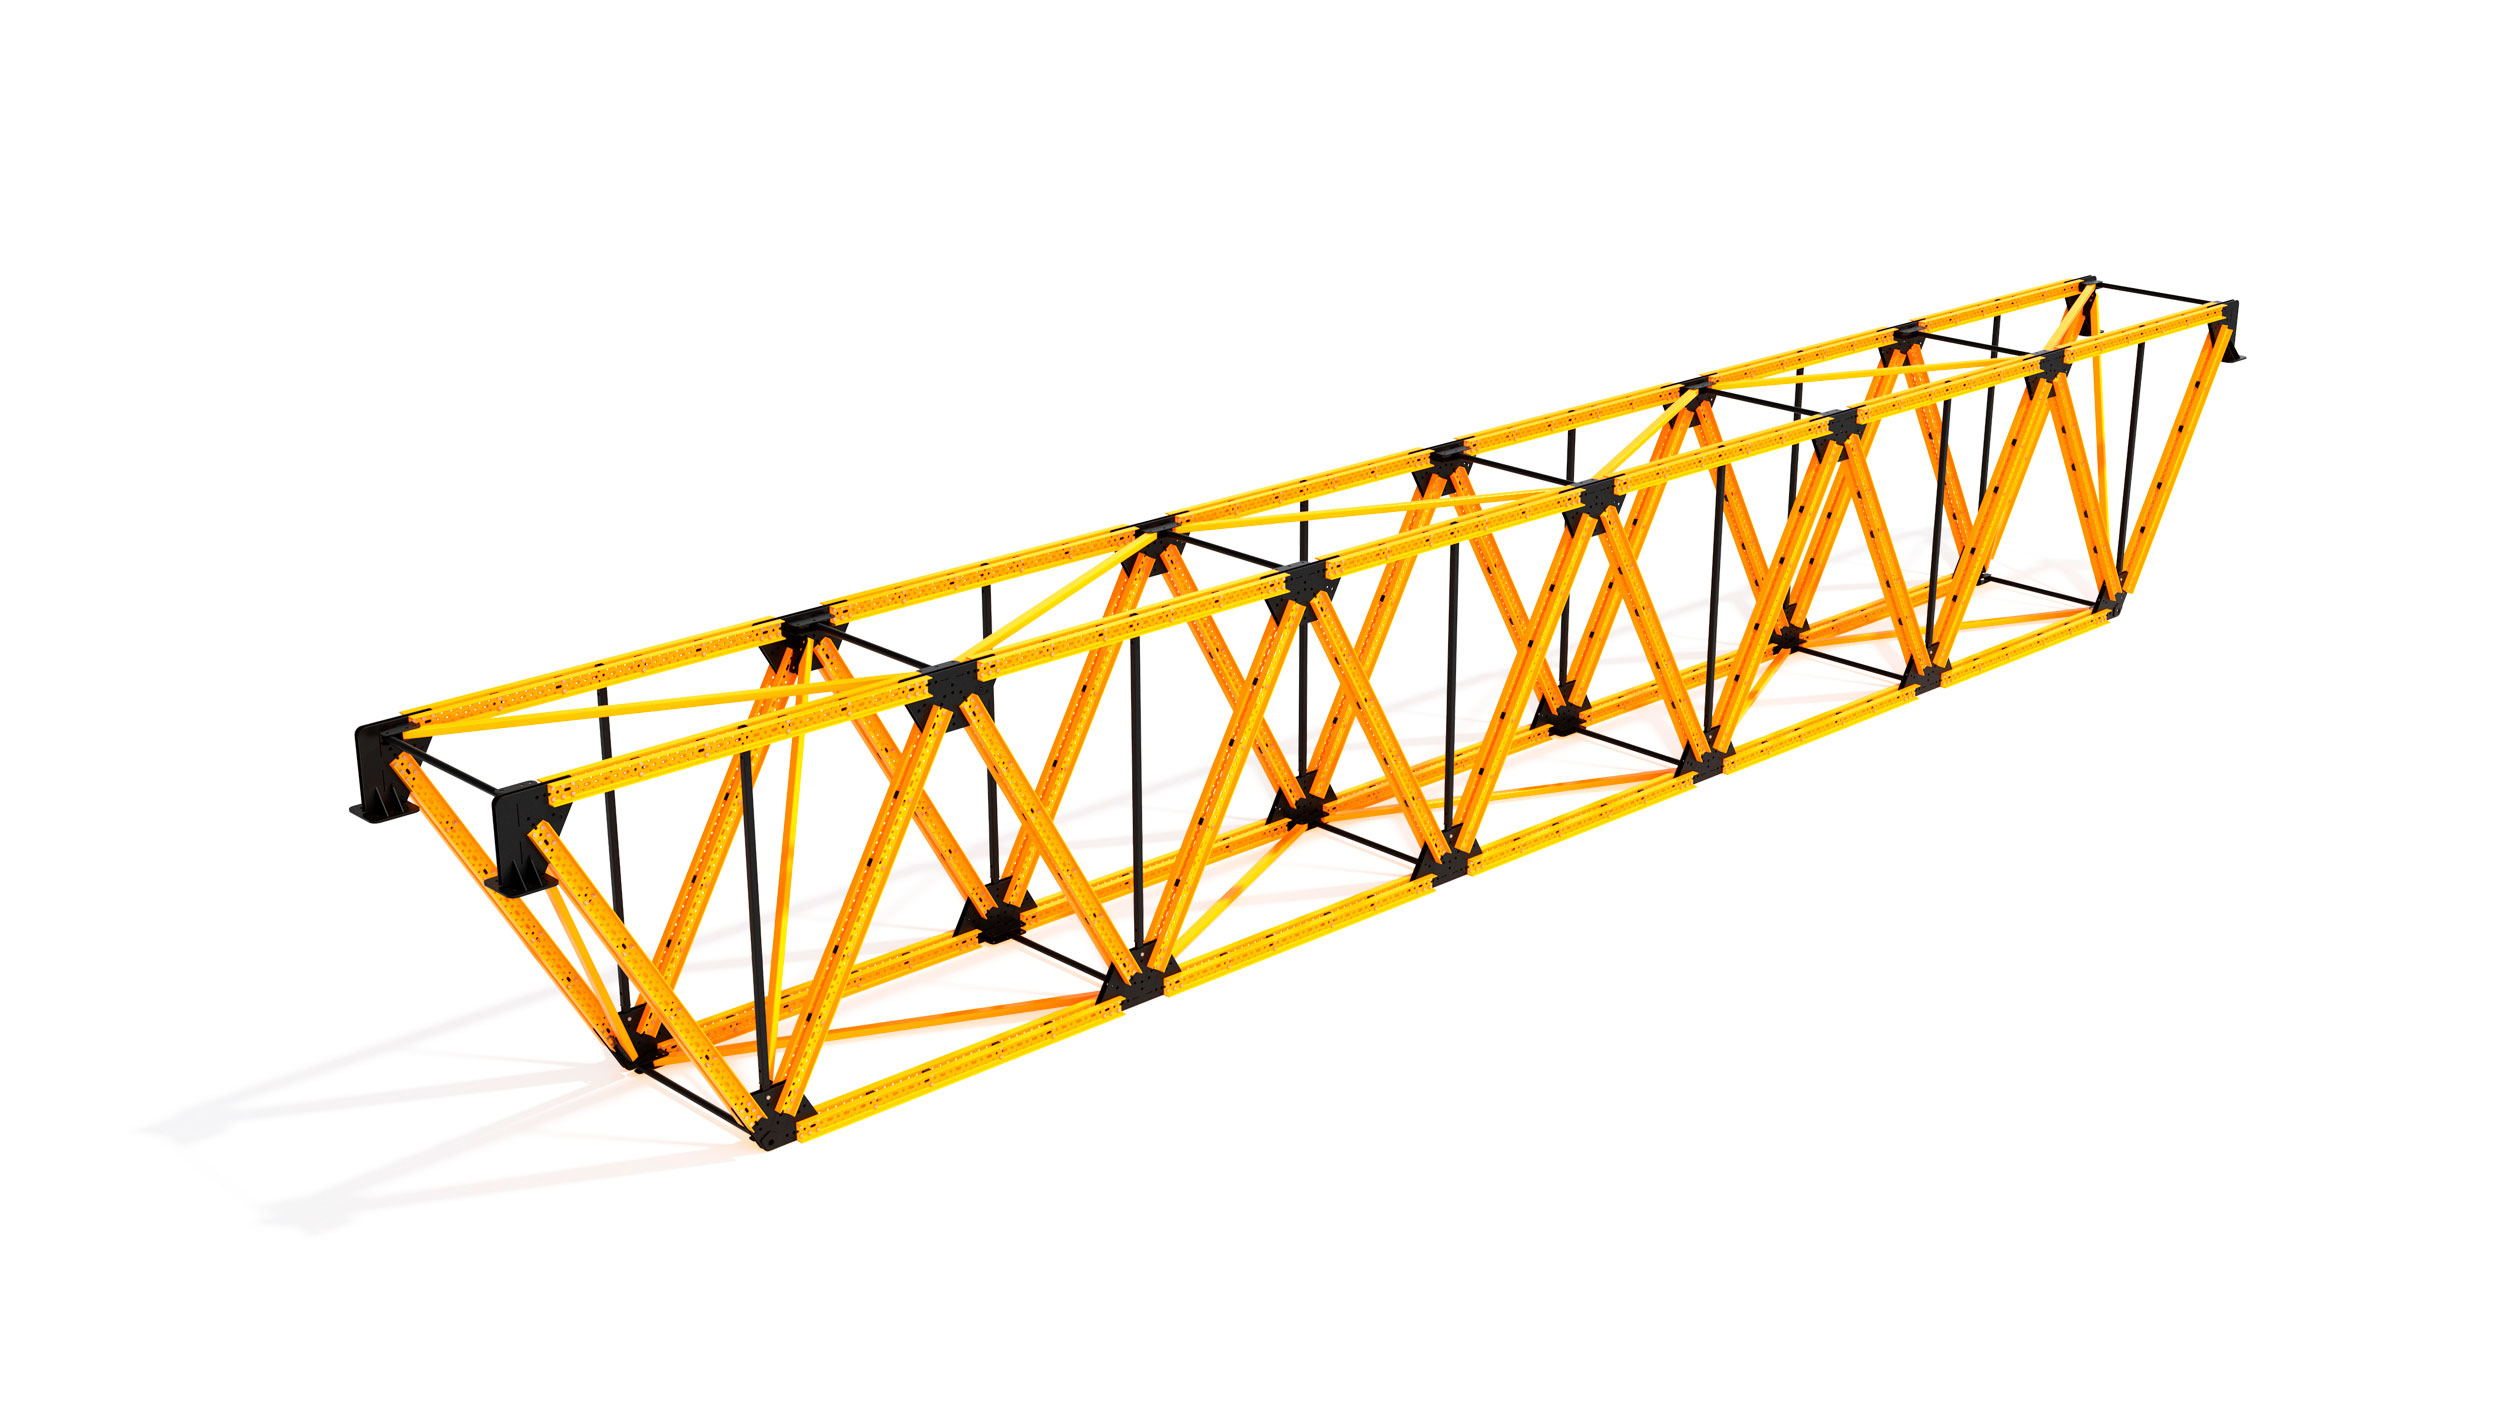 Versatile truss system for the construction of large concrete spans between supports. Mainly oriented towards non-residential and civil engineering constructions. It features great flexibility and numerous configuration possibilities.